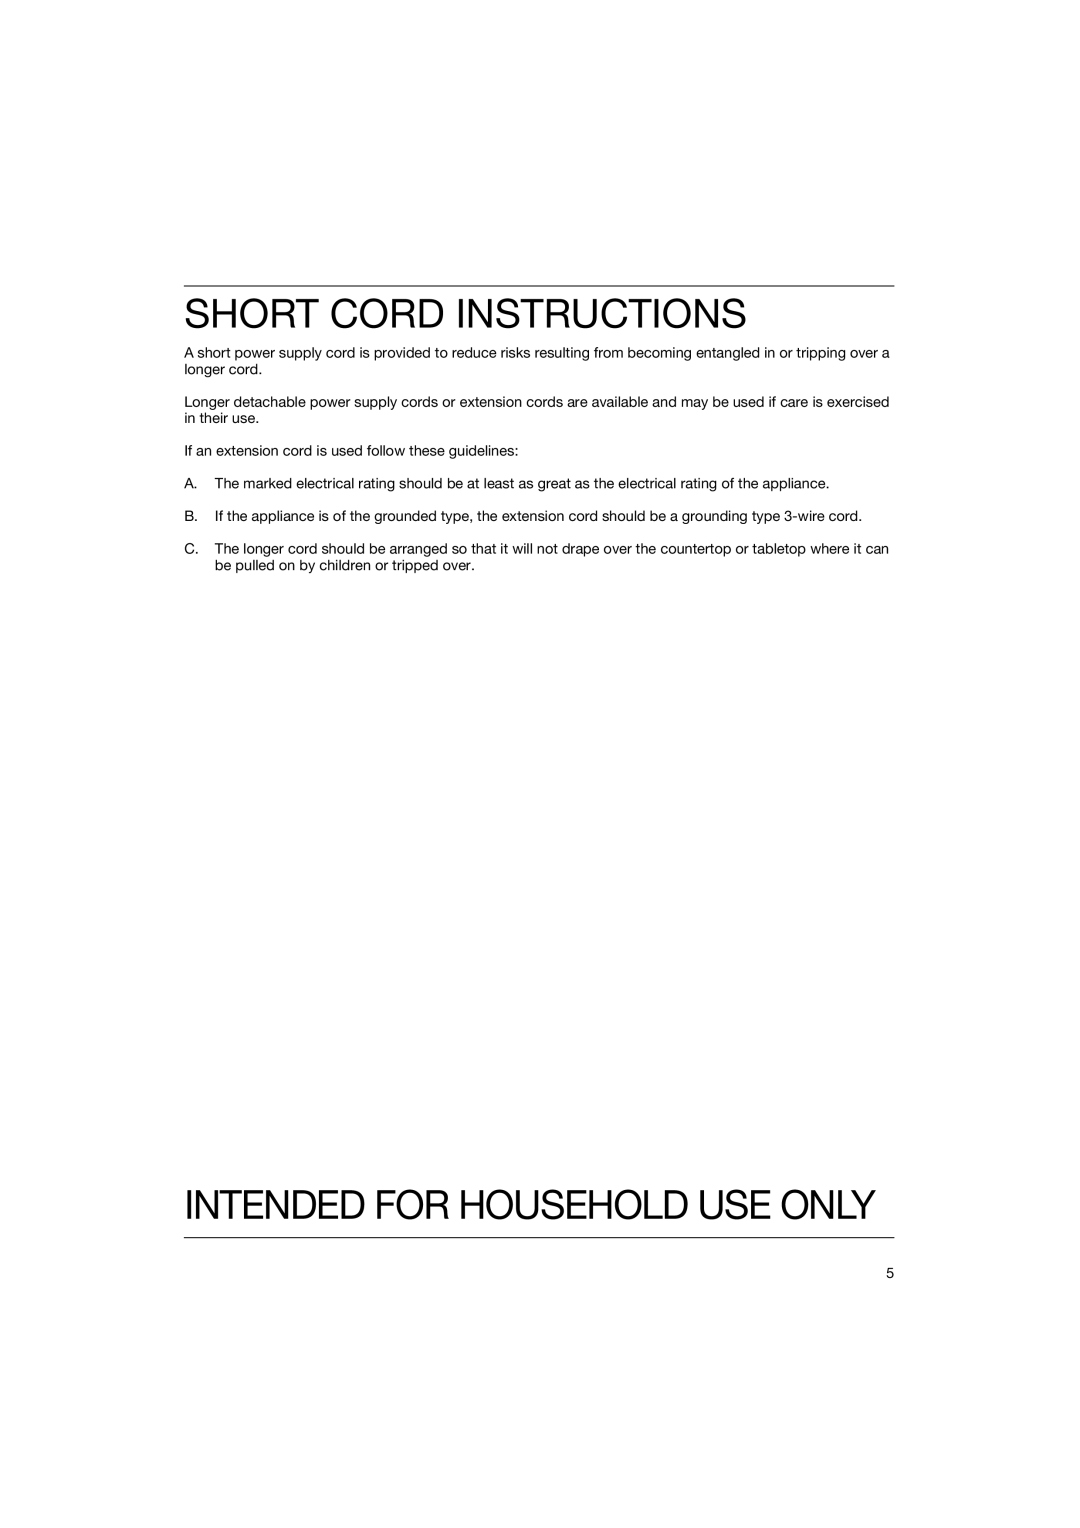 Braun 4118 manual Short Cord Instructions, Intended For Household Use Only 